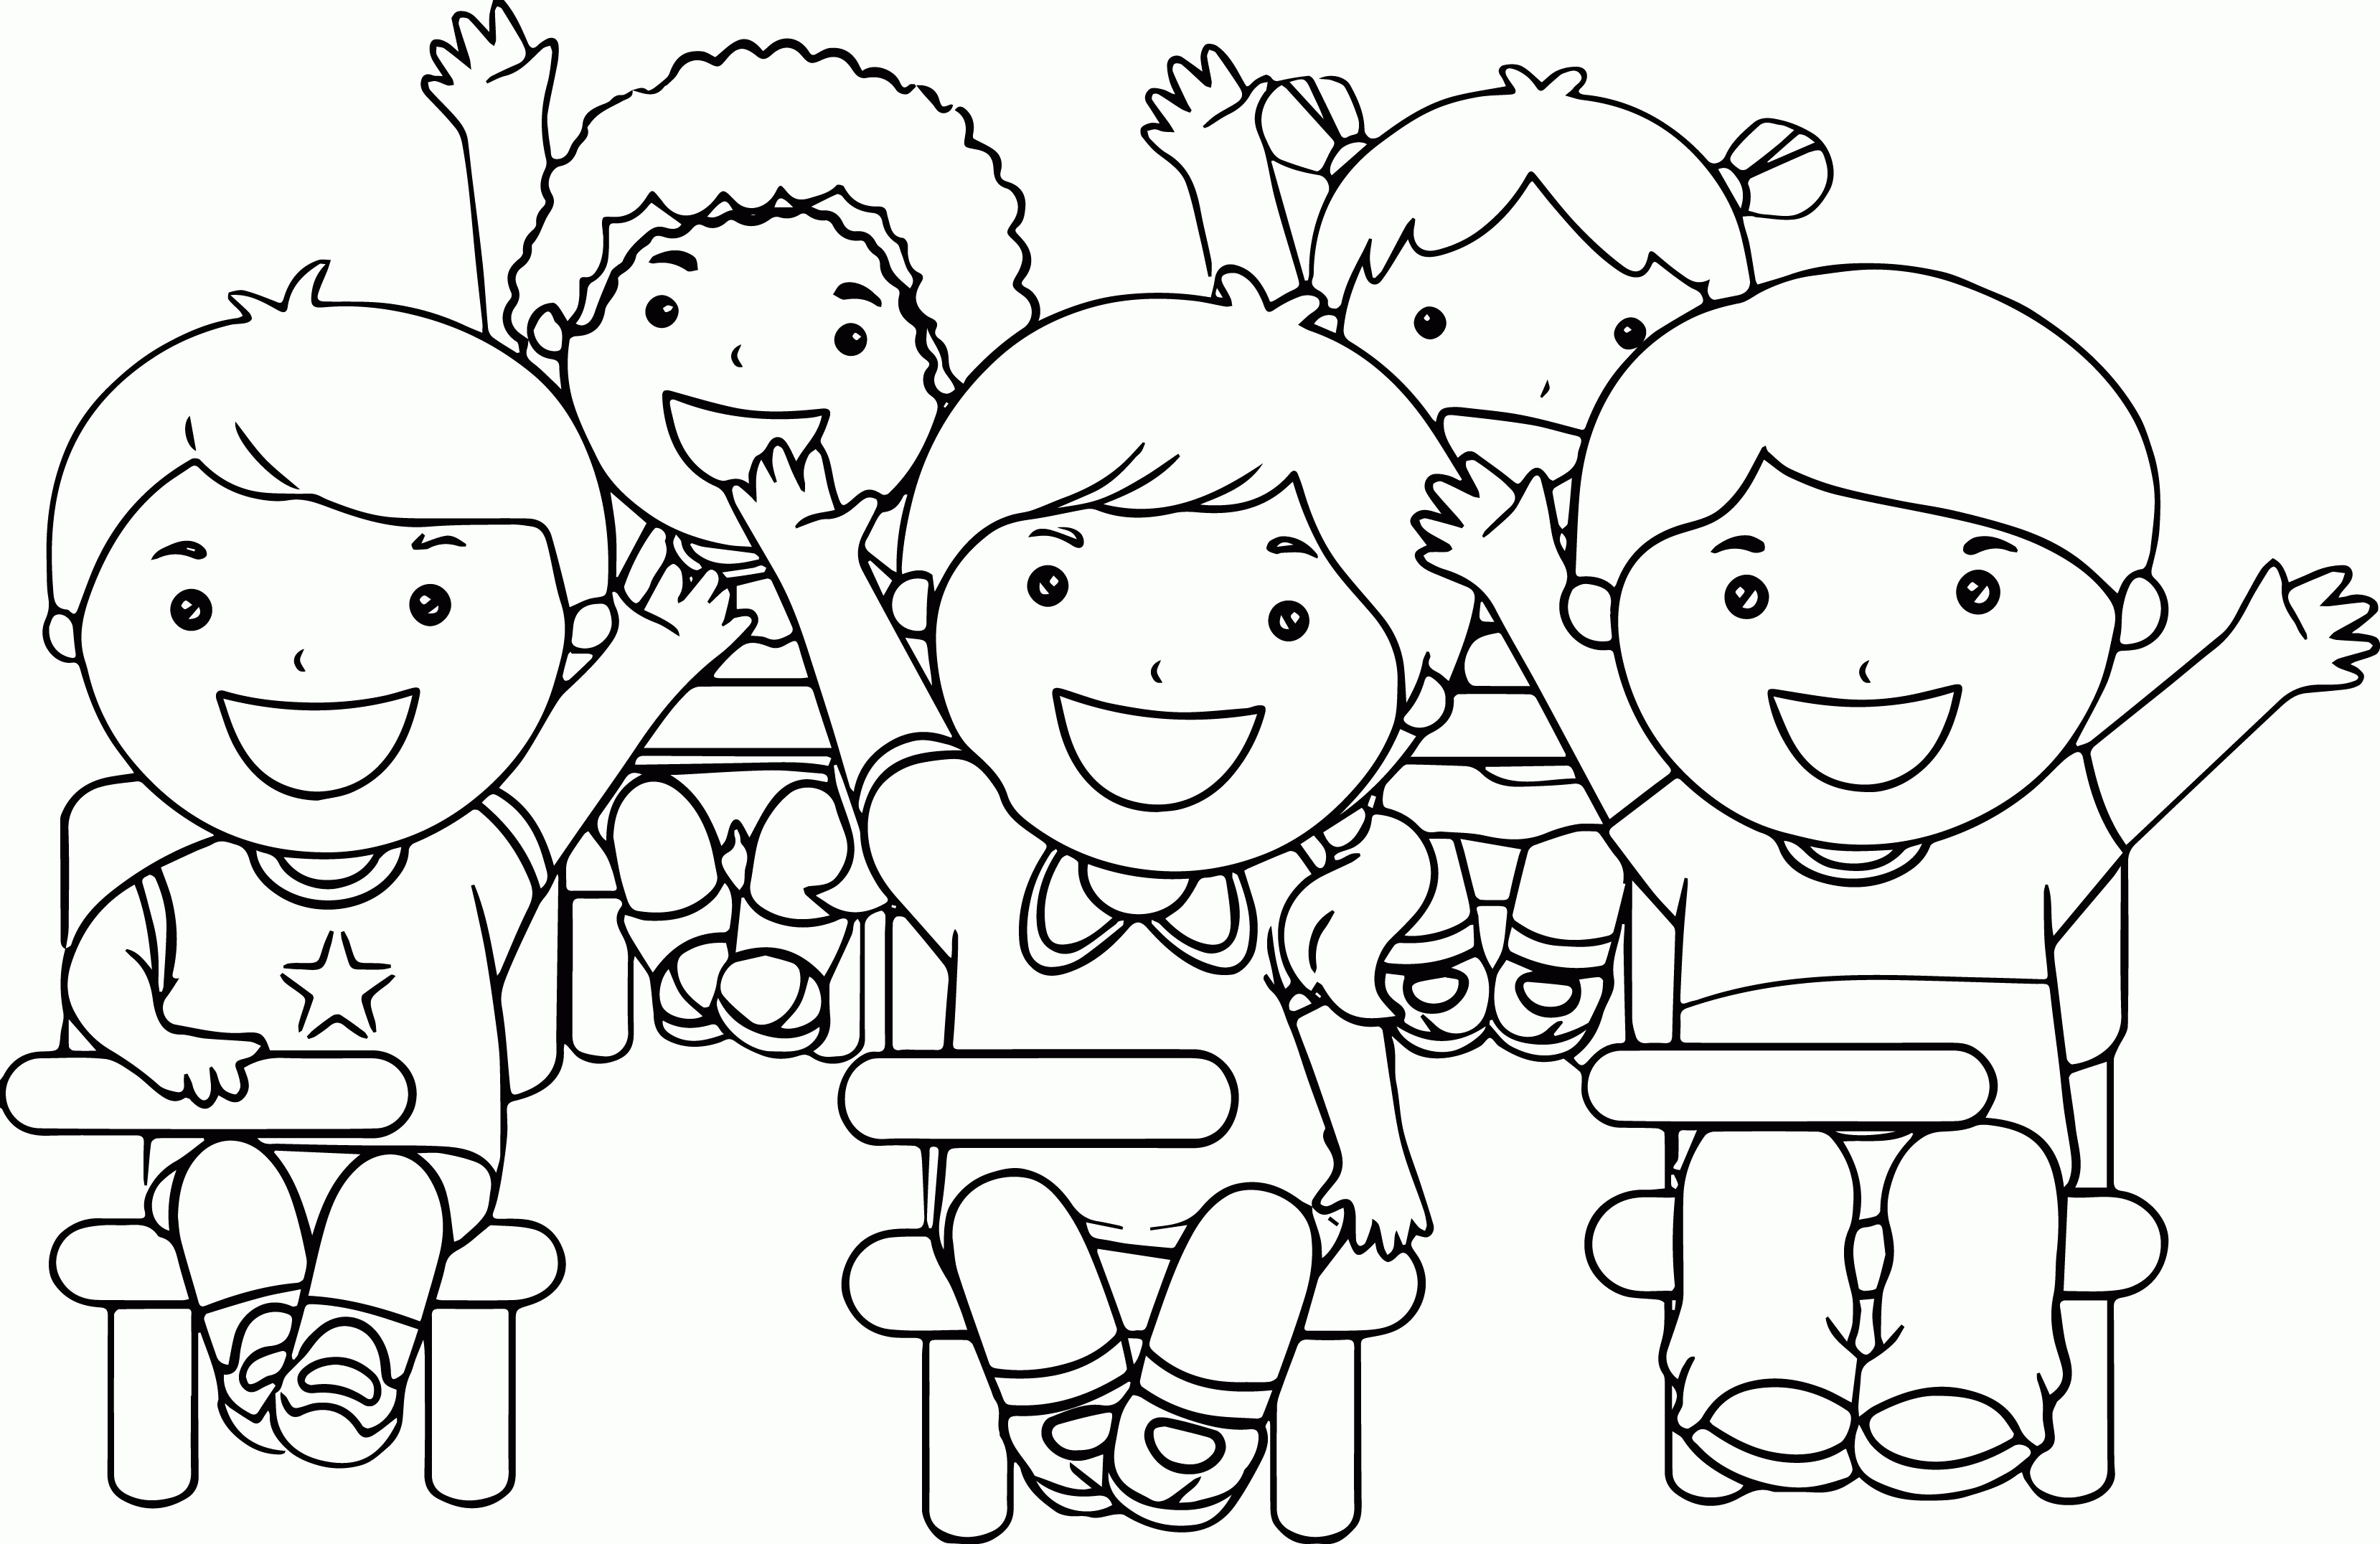 At The School Children Coloring Page | 